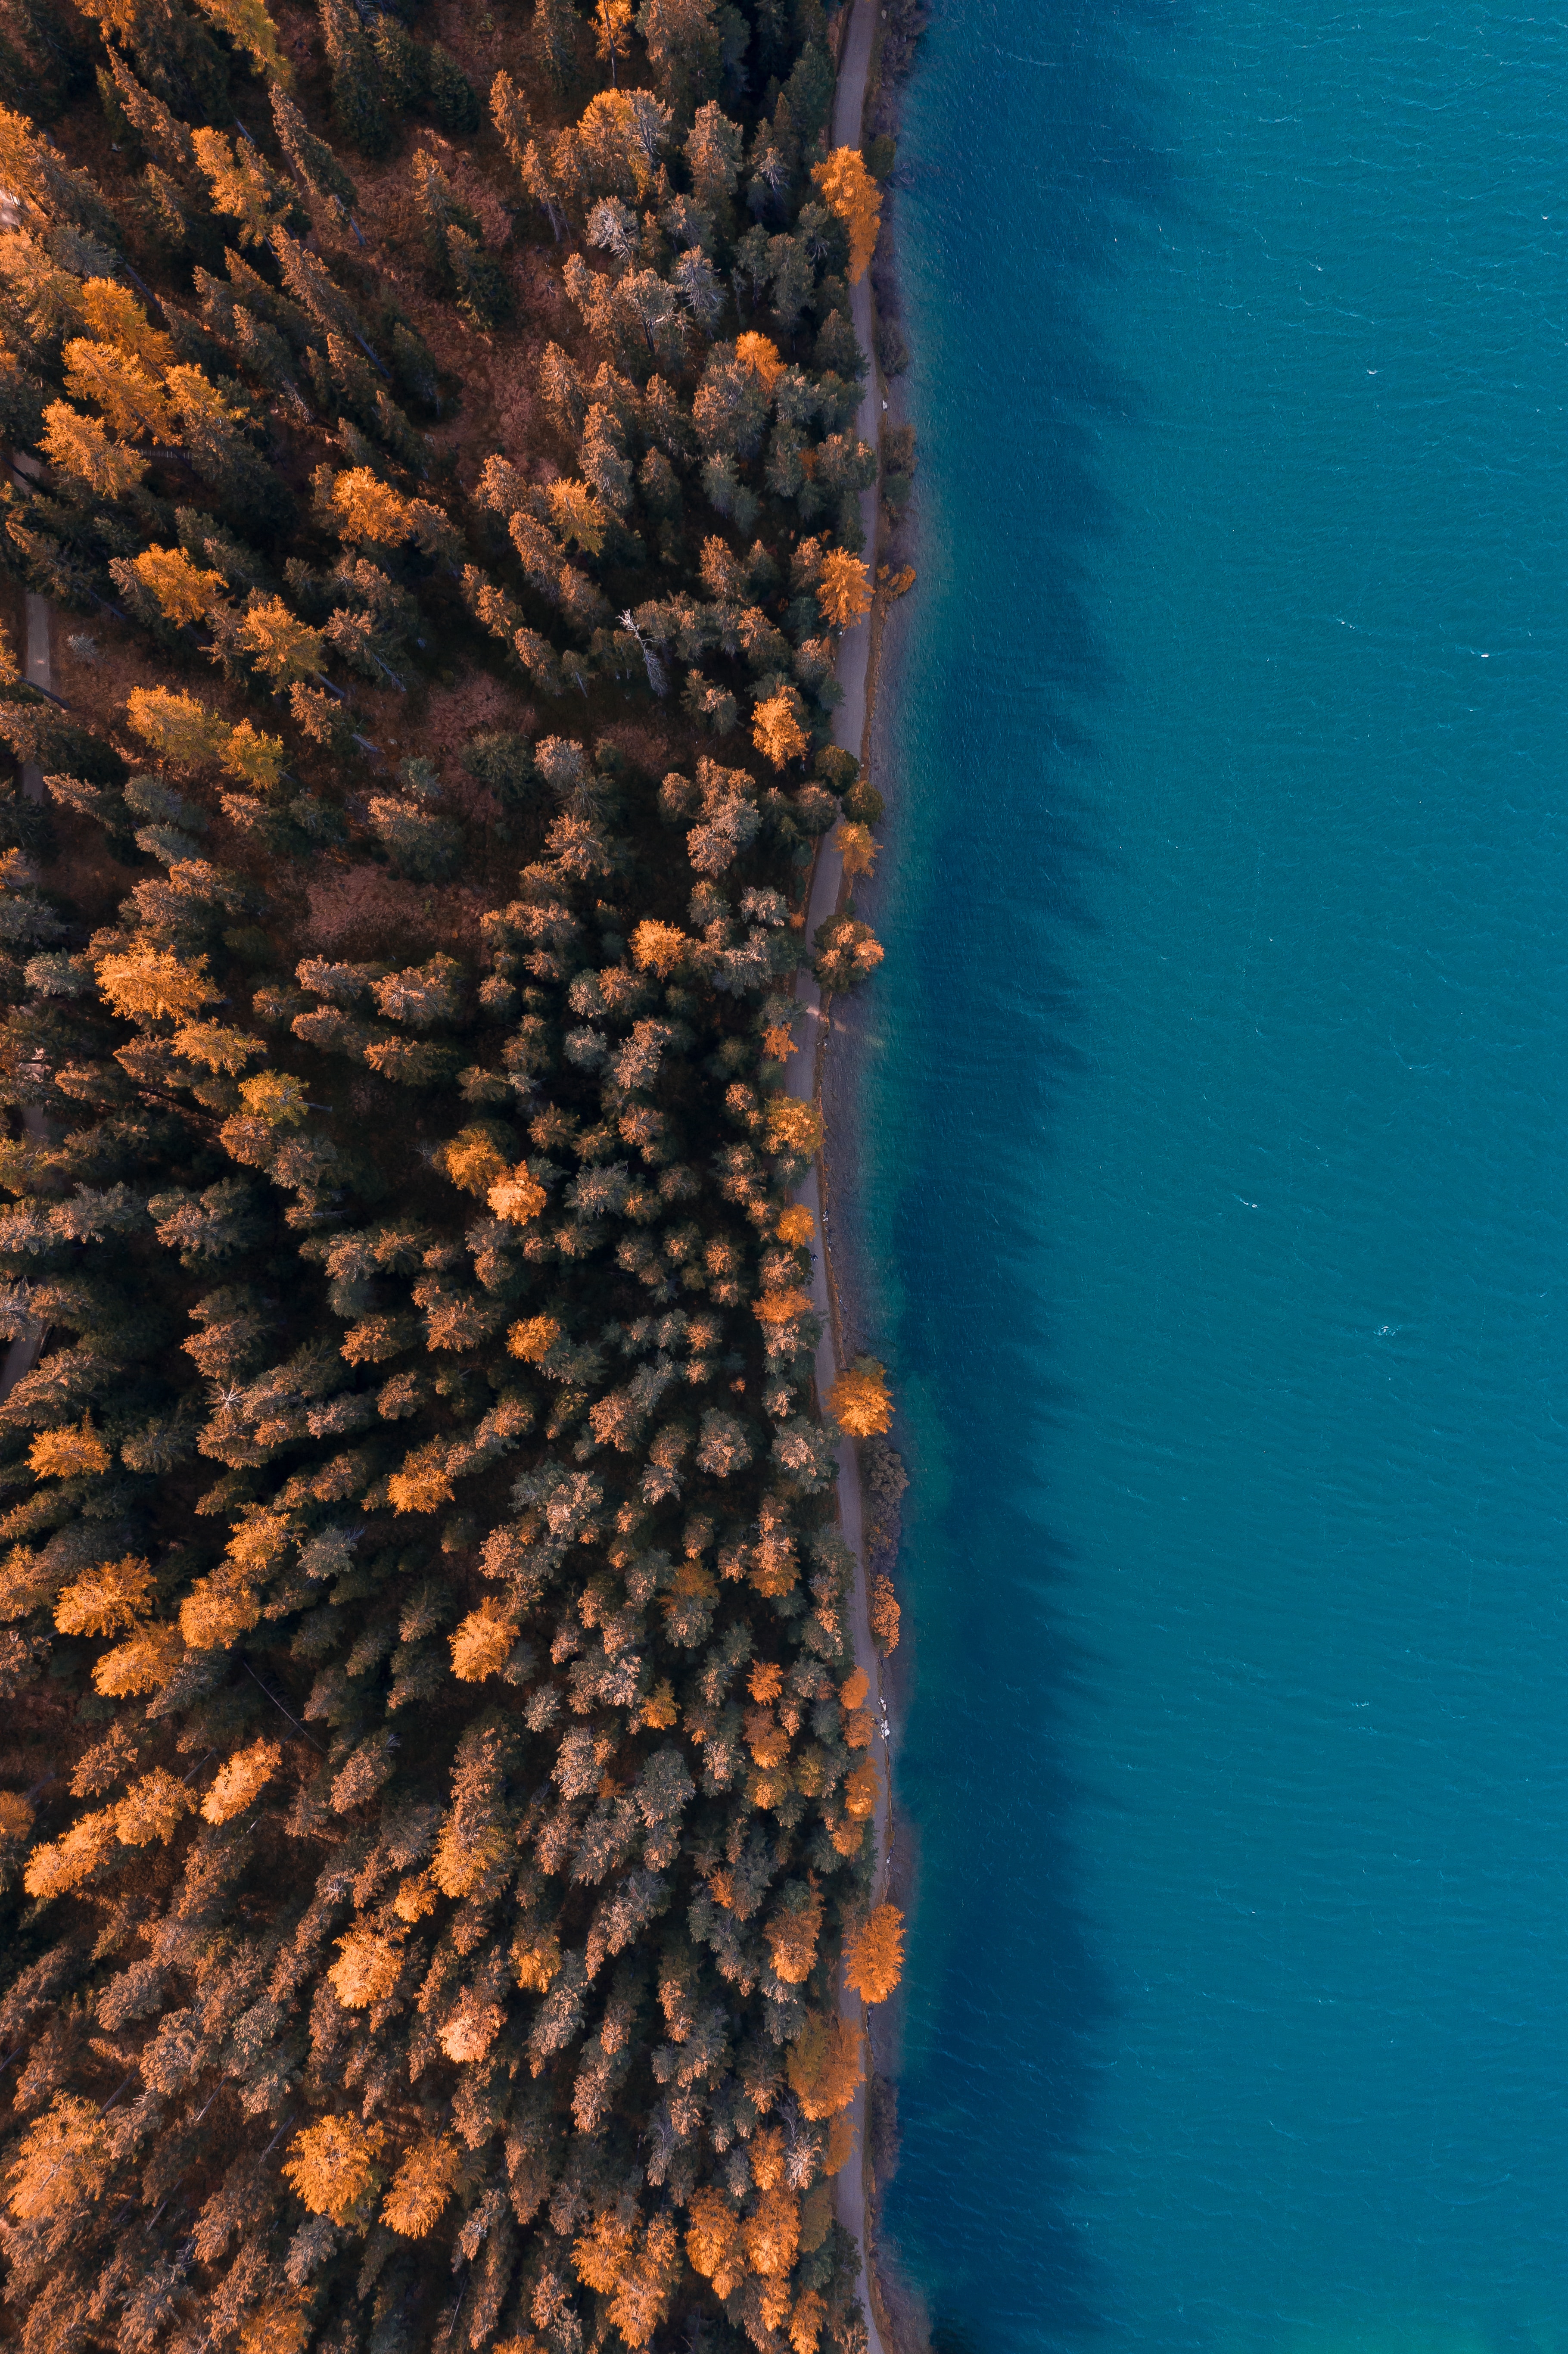 view from above, water, nature, trees, sea, coast, forest iphone wallpaper